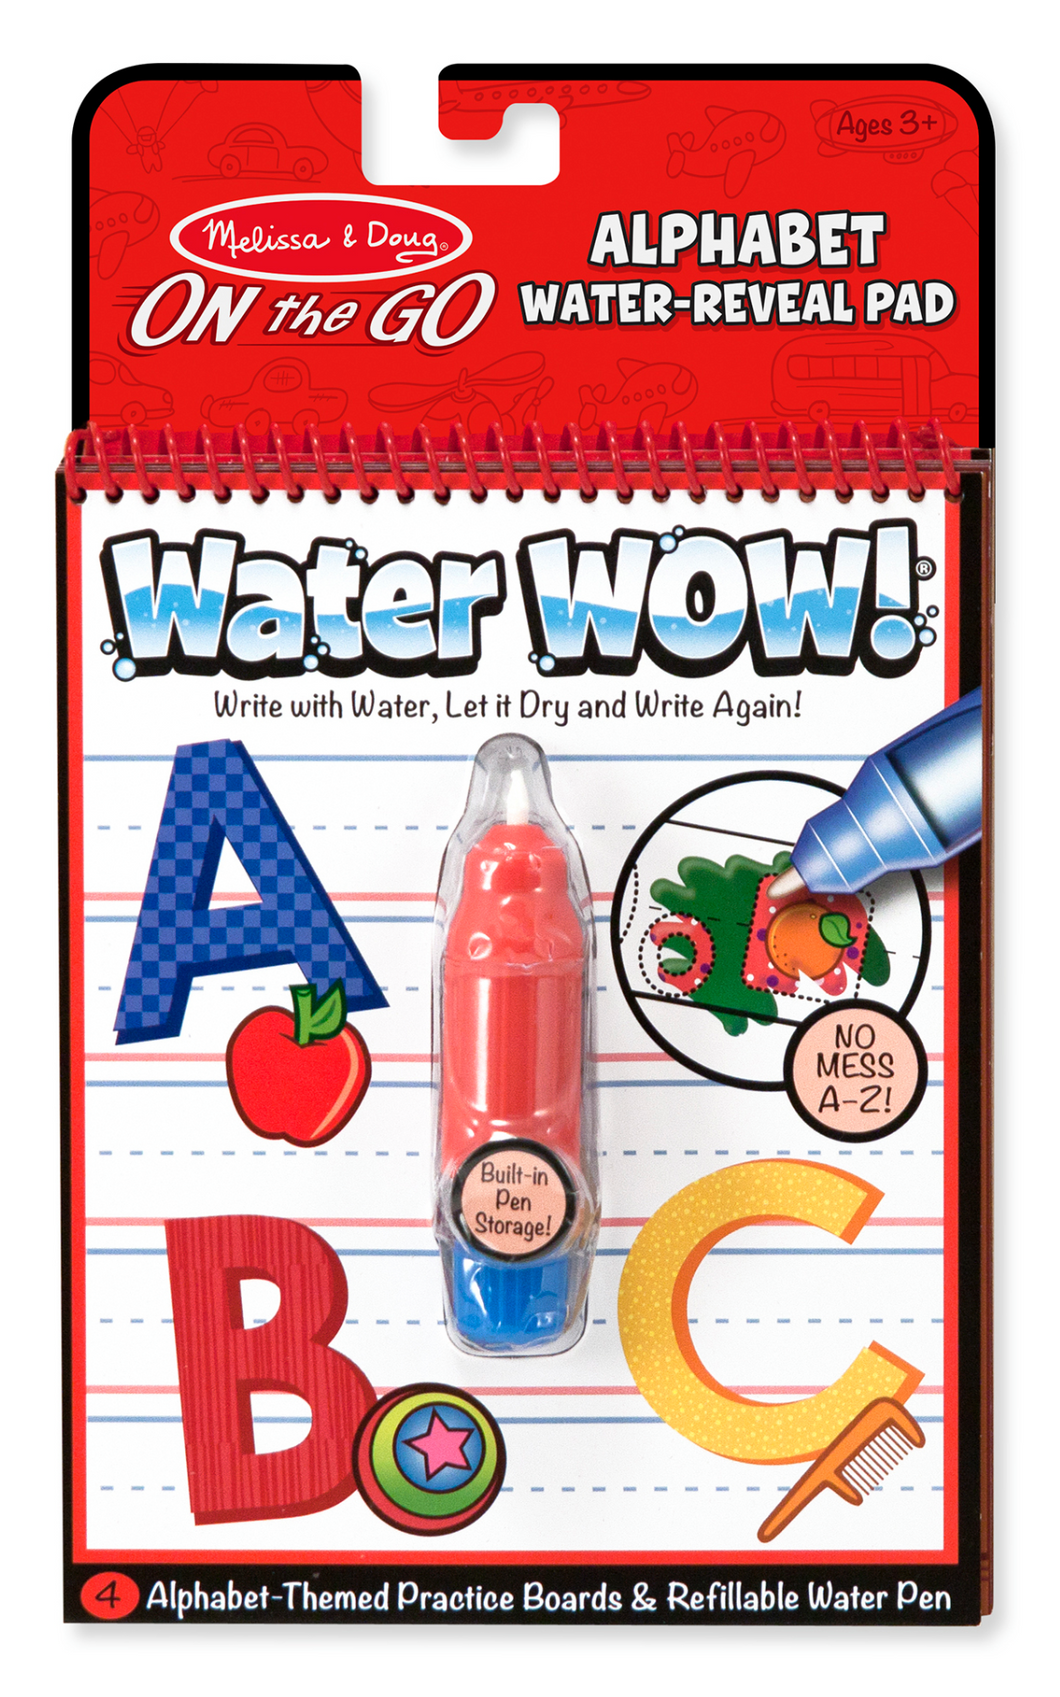 Water wow! ABC's